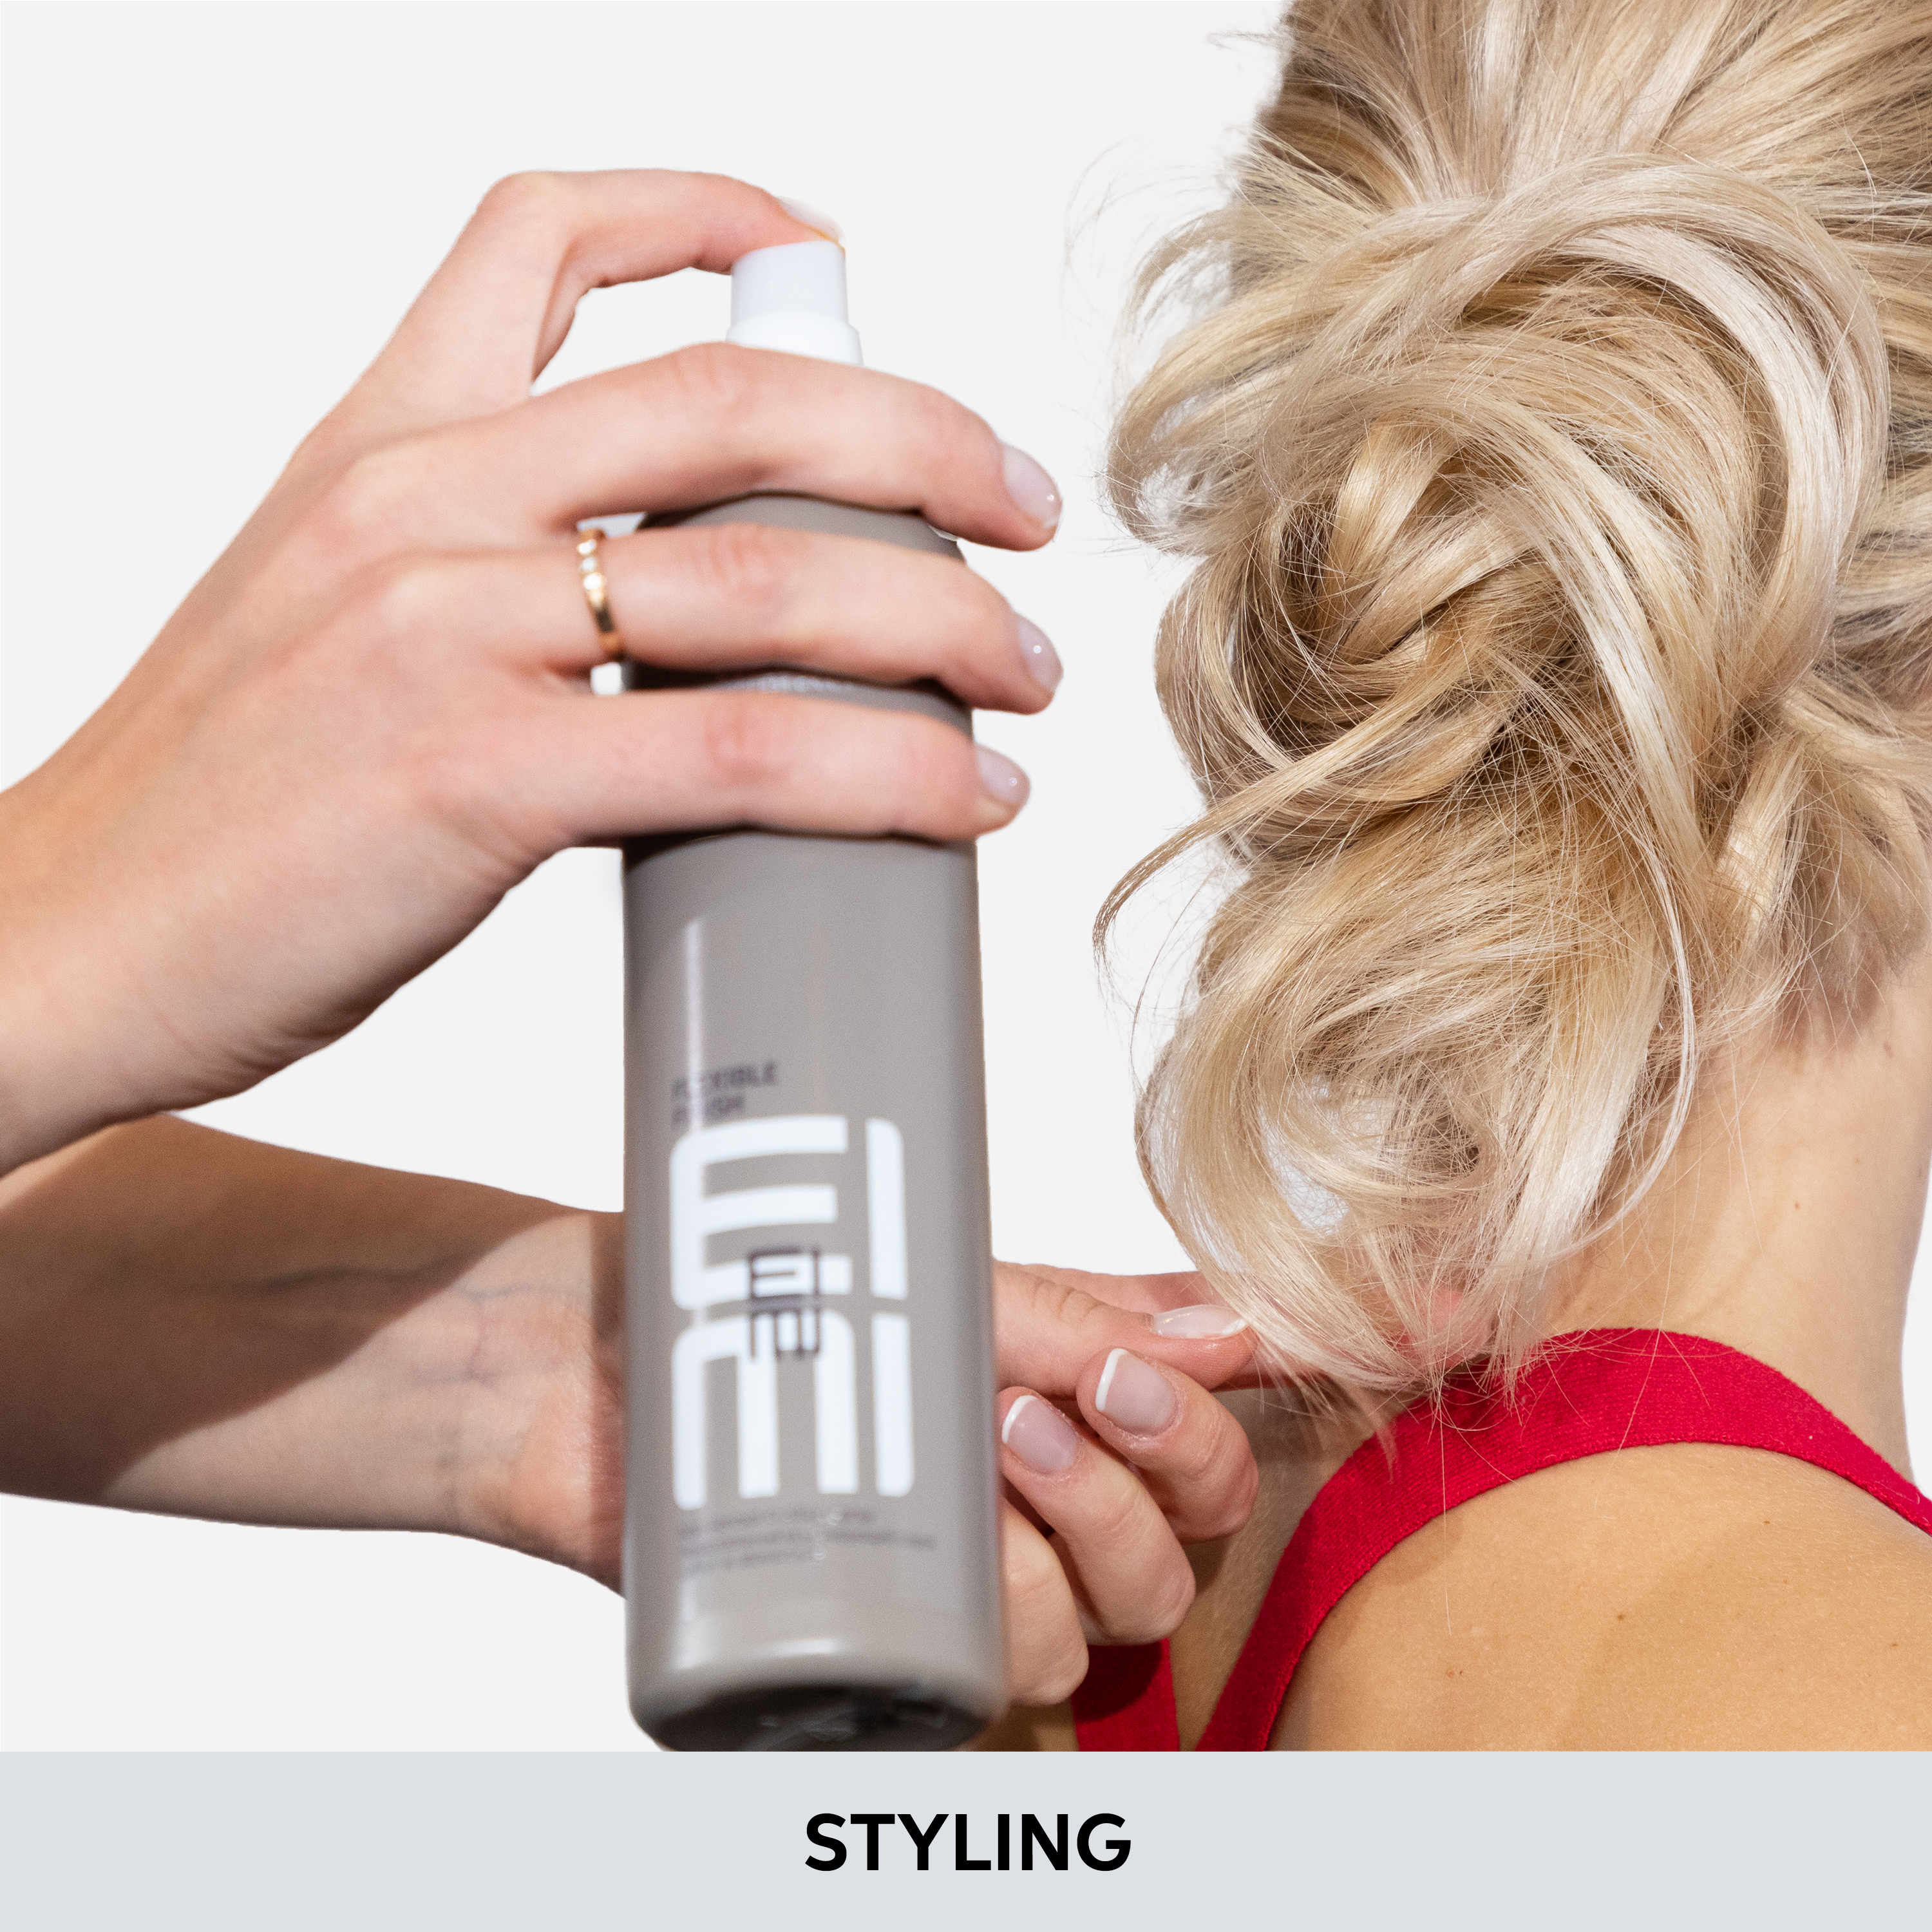 WELLA PROFESSIONALS HAIR STYLING PRODUCTS